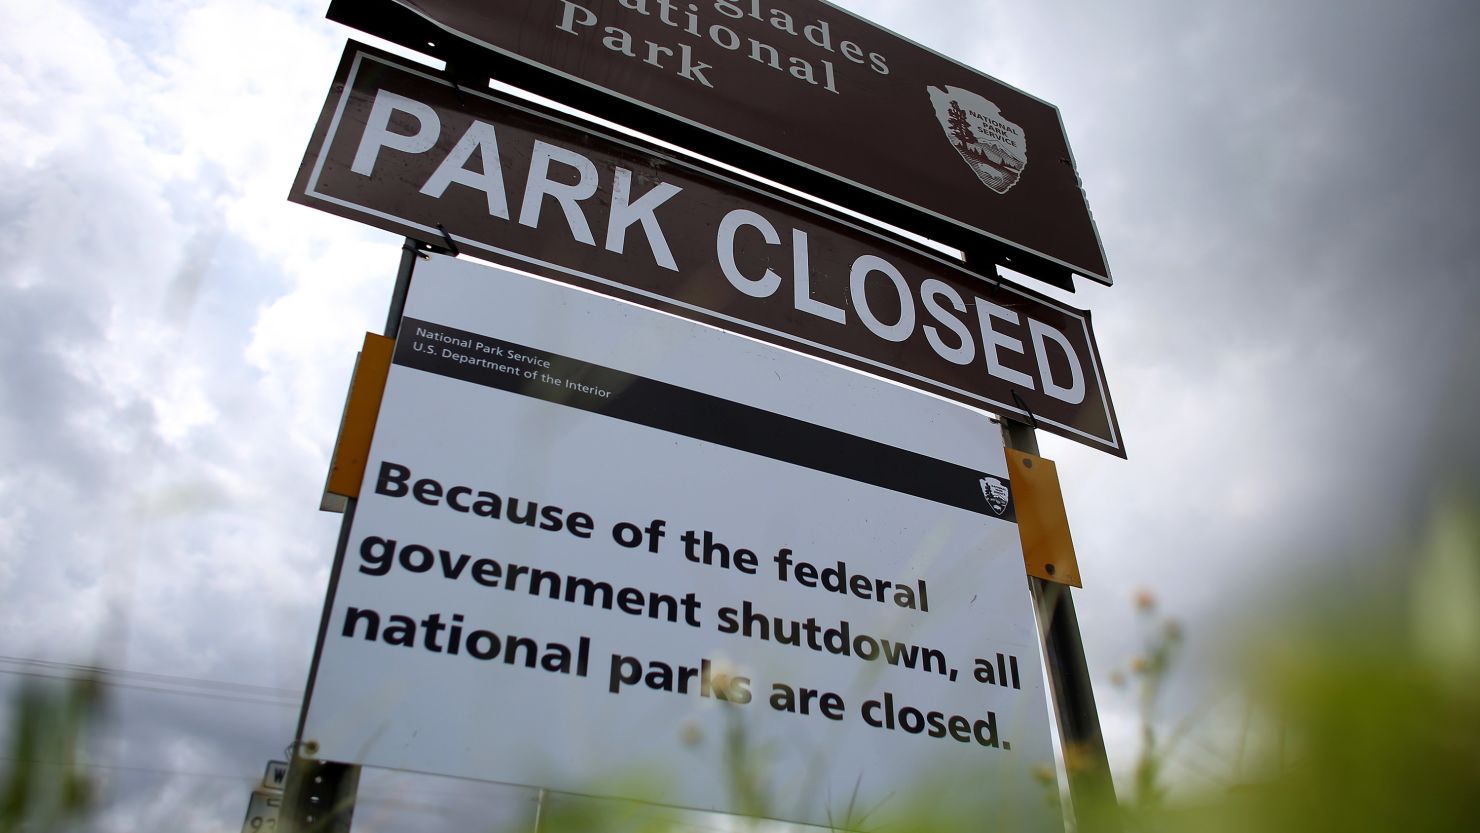 A sign near the entrance to the Everglades National Park is seen indicating it is closed on October 7, 2013 in Miami, Florida. 